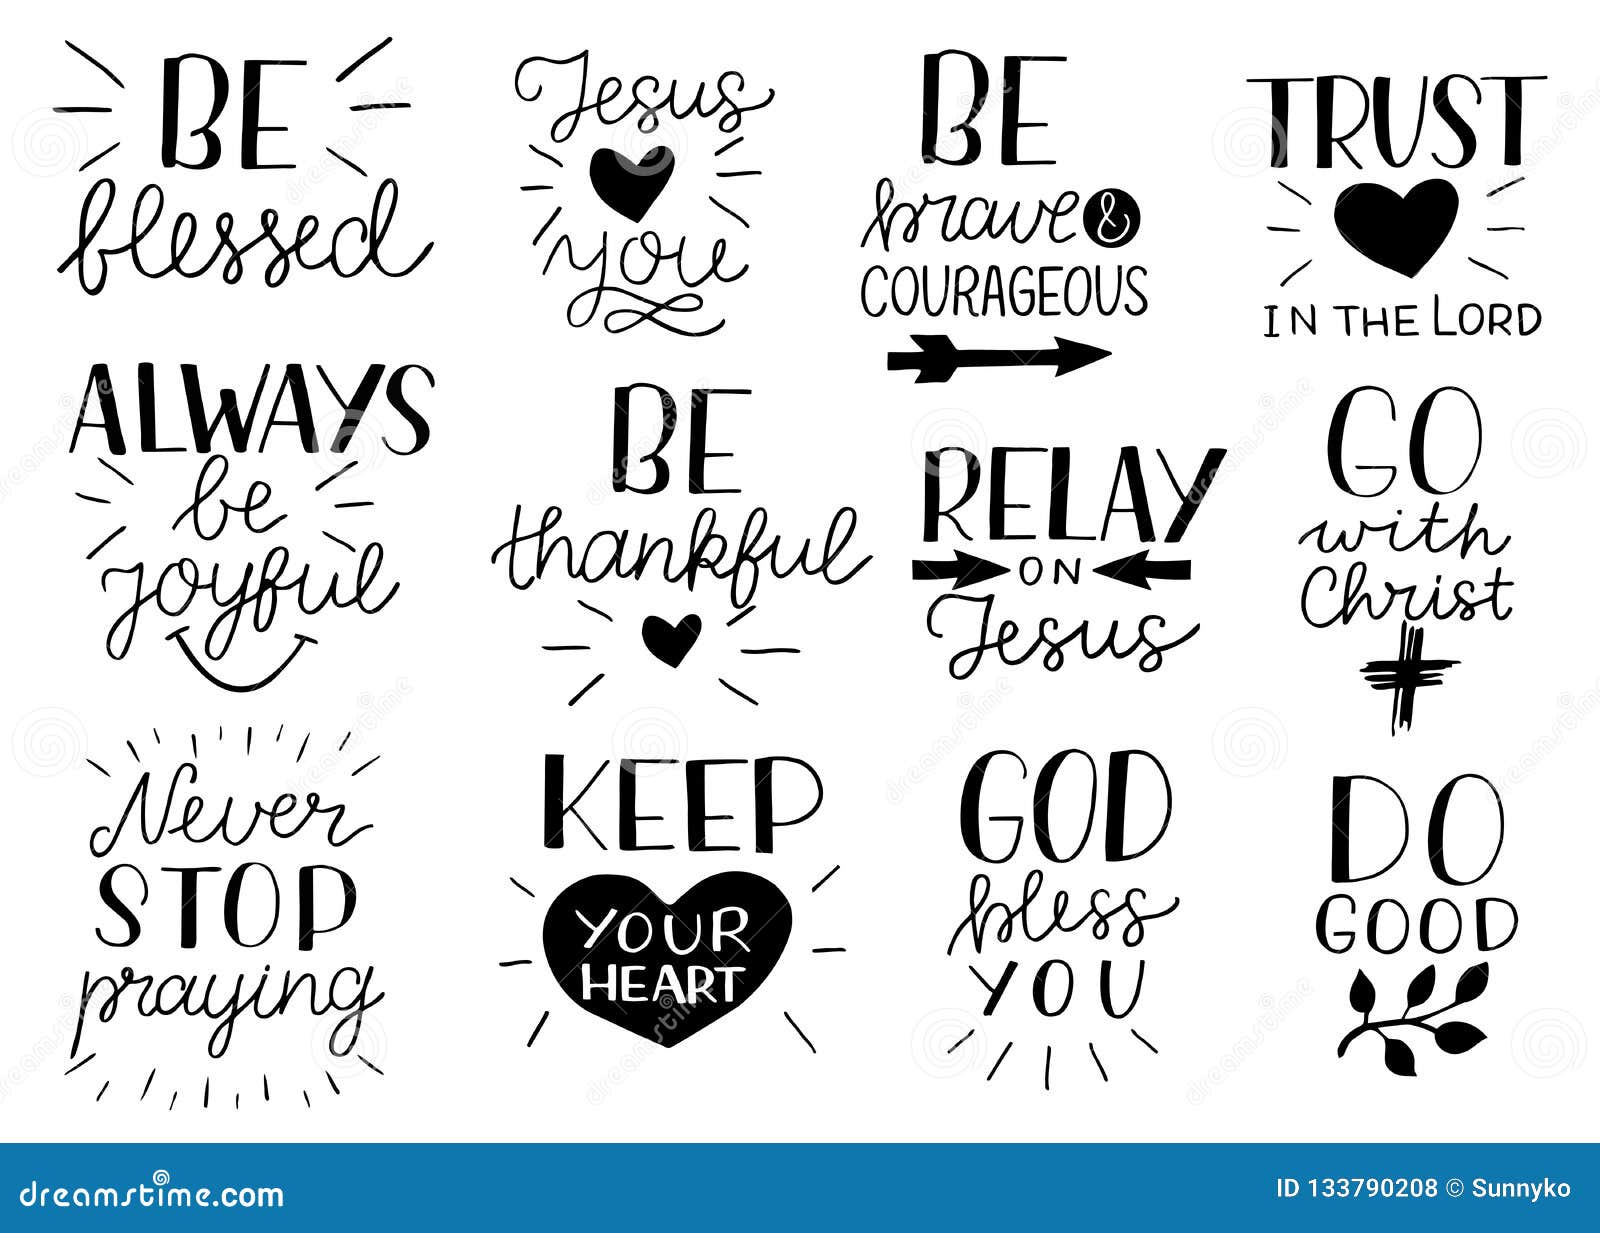 set of 12 hand lettering christian quotes be strong and courageous. jesus loves you. go with christ. do good.never stop